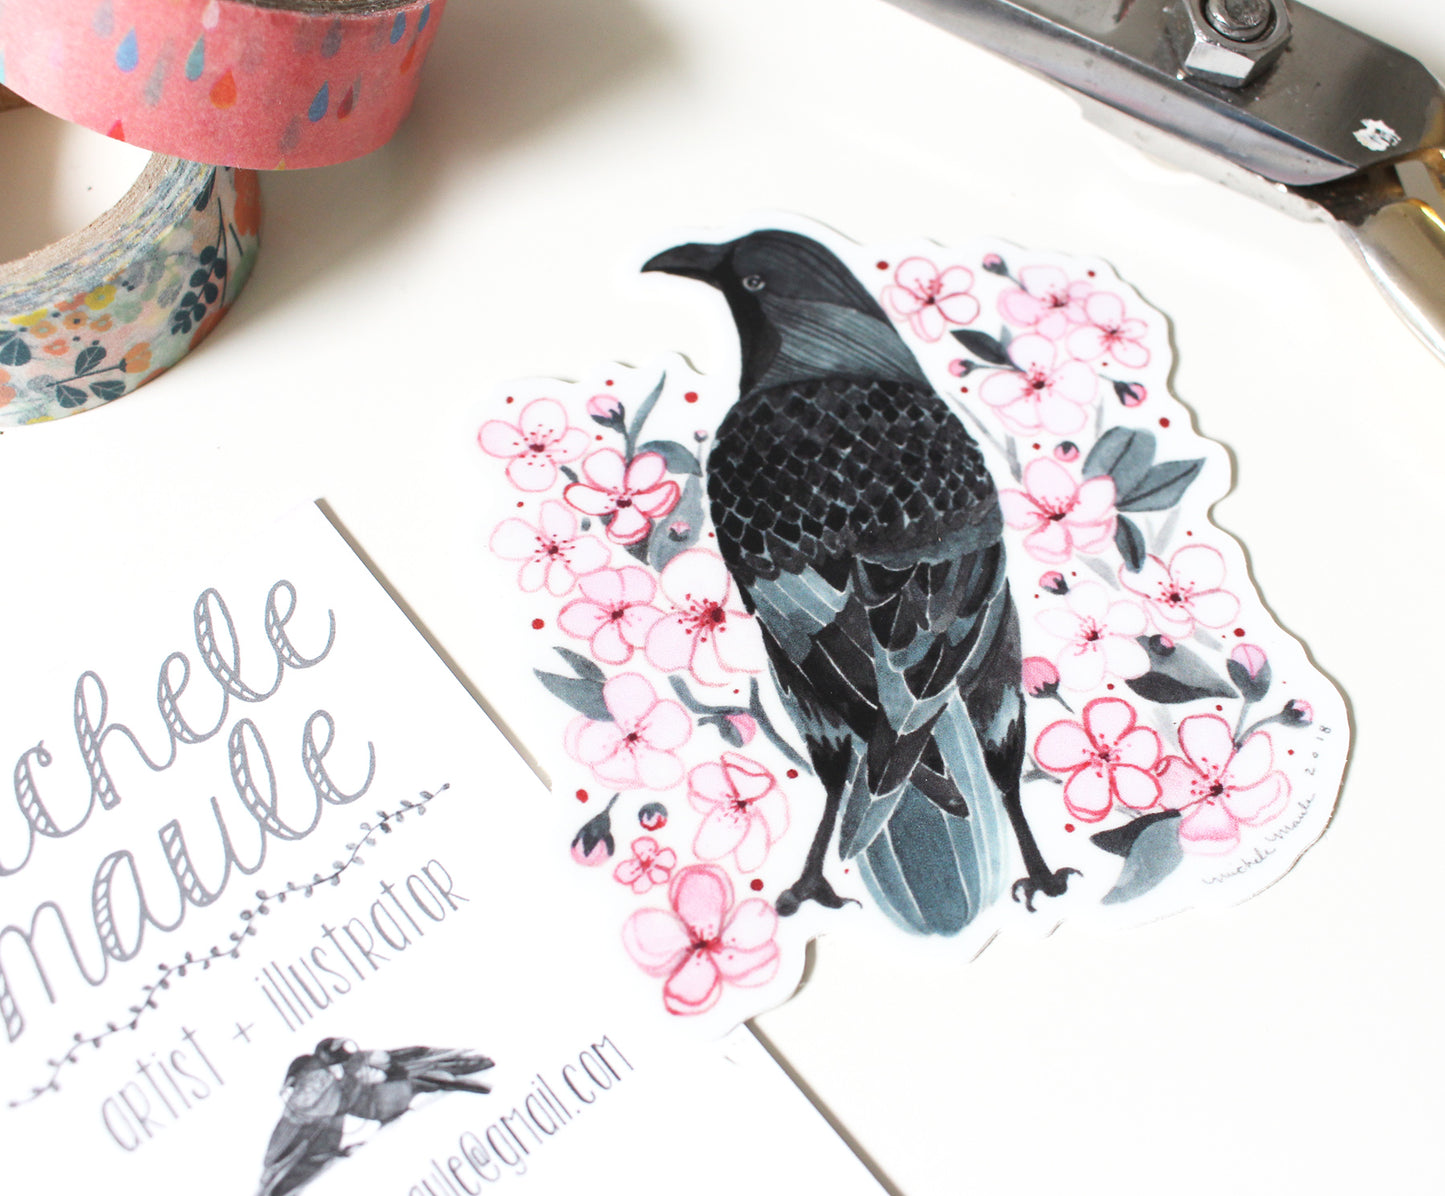 2.5 x 3" Crow with Blossoms Sticker